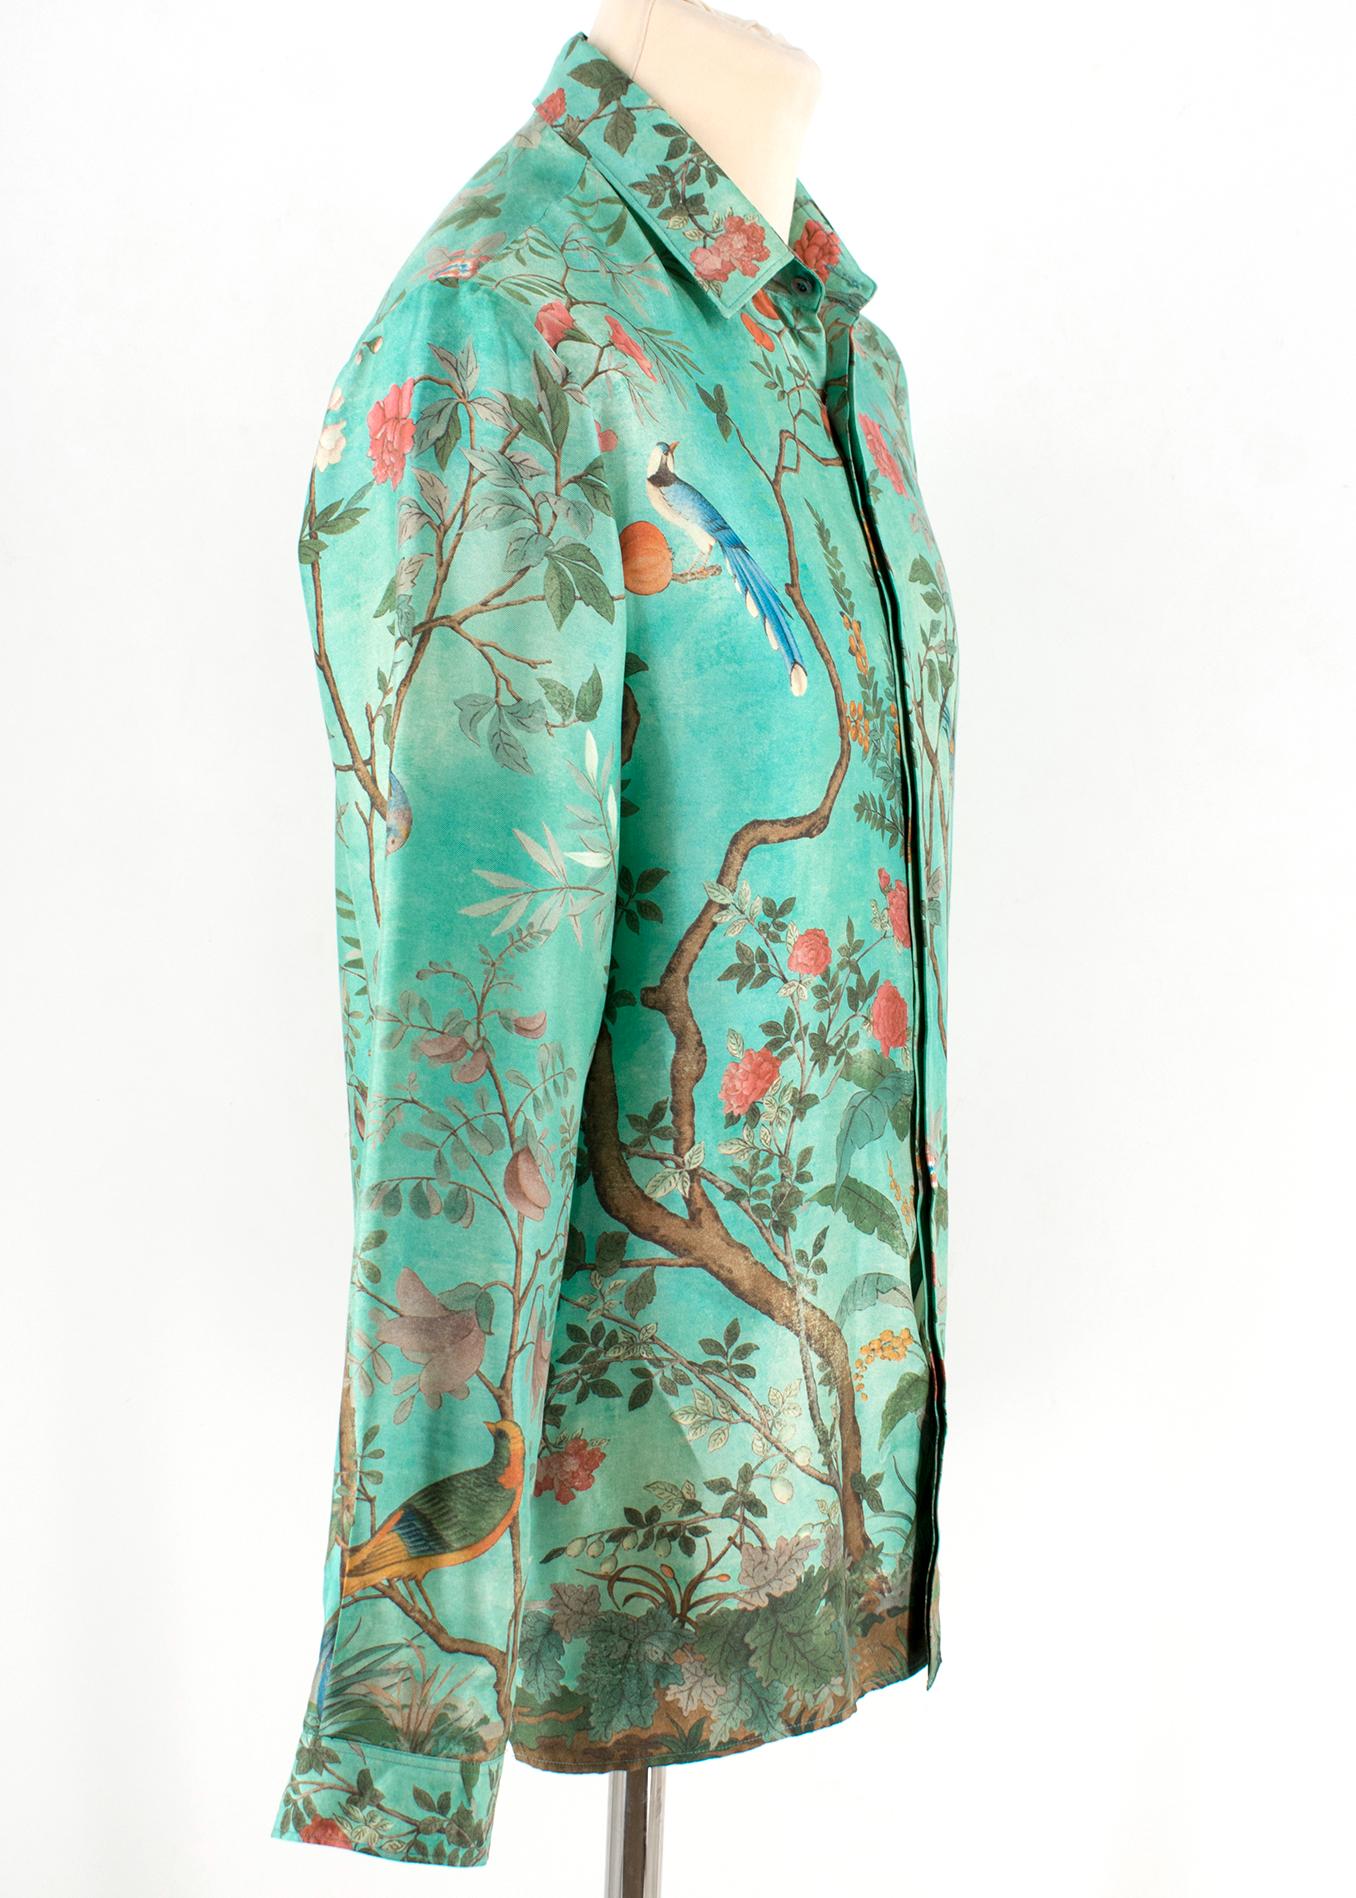 Gucci Heritage Floral Print Silk Shirt

Floral print green silk shirt
Self-covered buttons
Long sleeves
Oversize fit
Button up shirt
Silver hidden buttons
Light weight material 
Button up cuffs

Please note, these items are pre-owned and may show